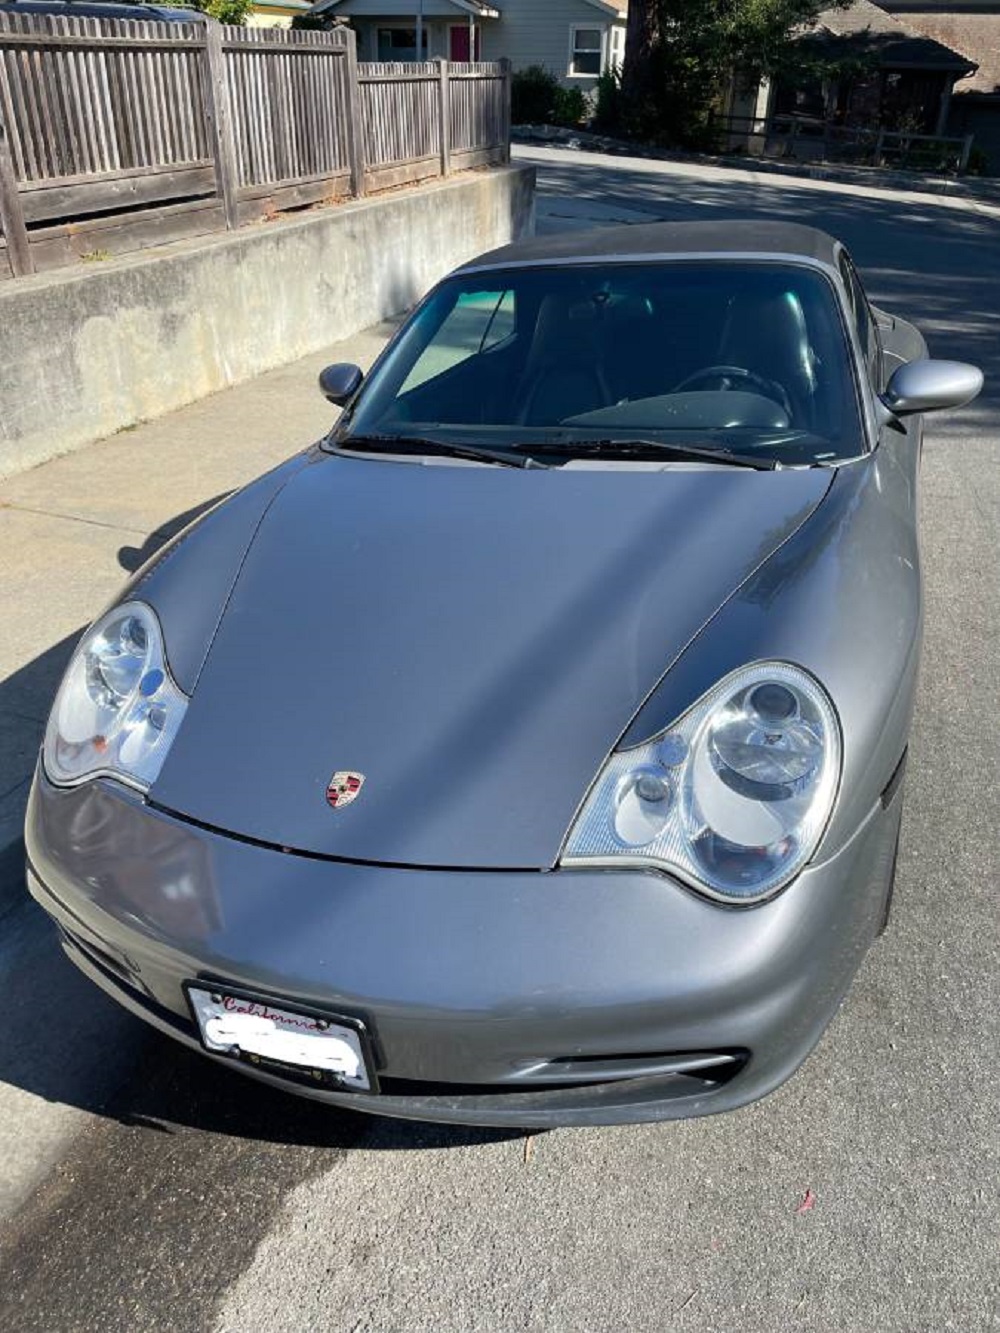 Is this 2003 911 Carrera 4 Cabriolet a Good Buy at $23,500?